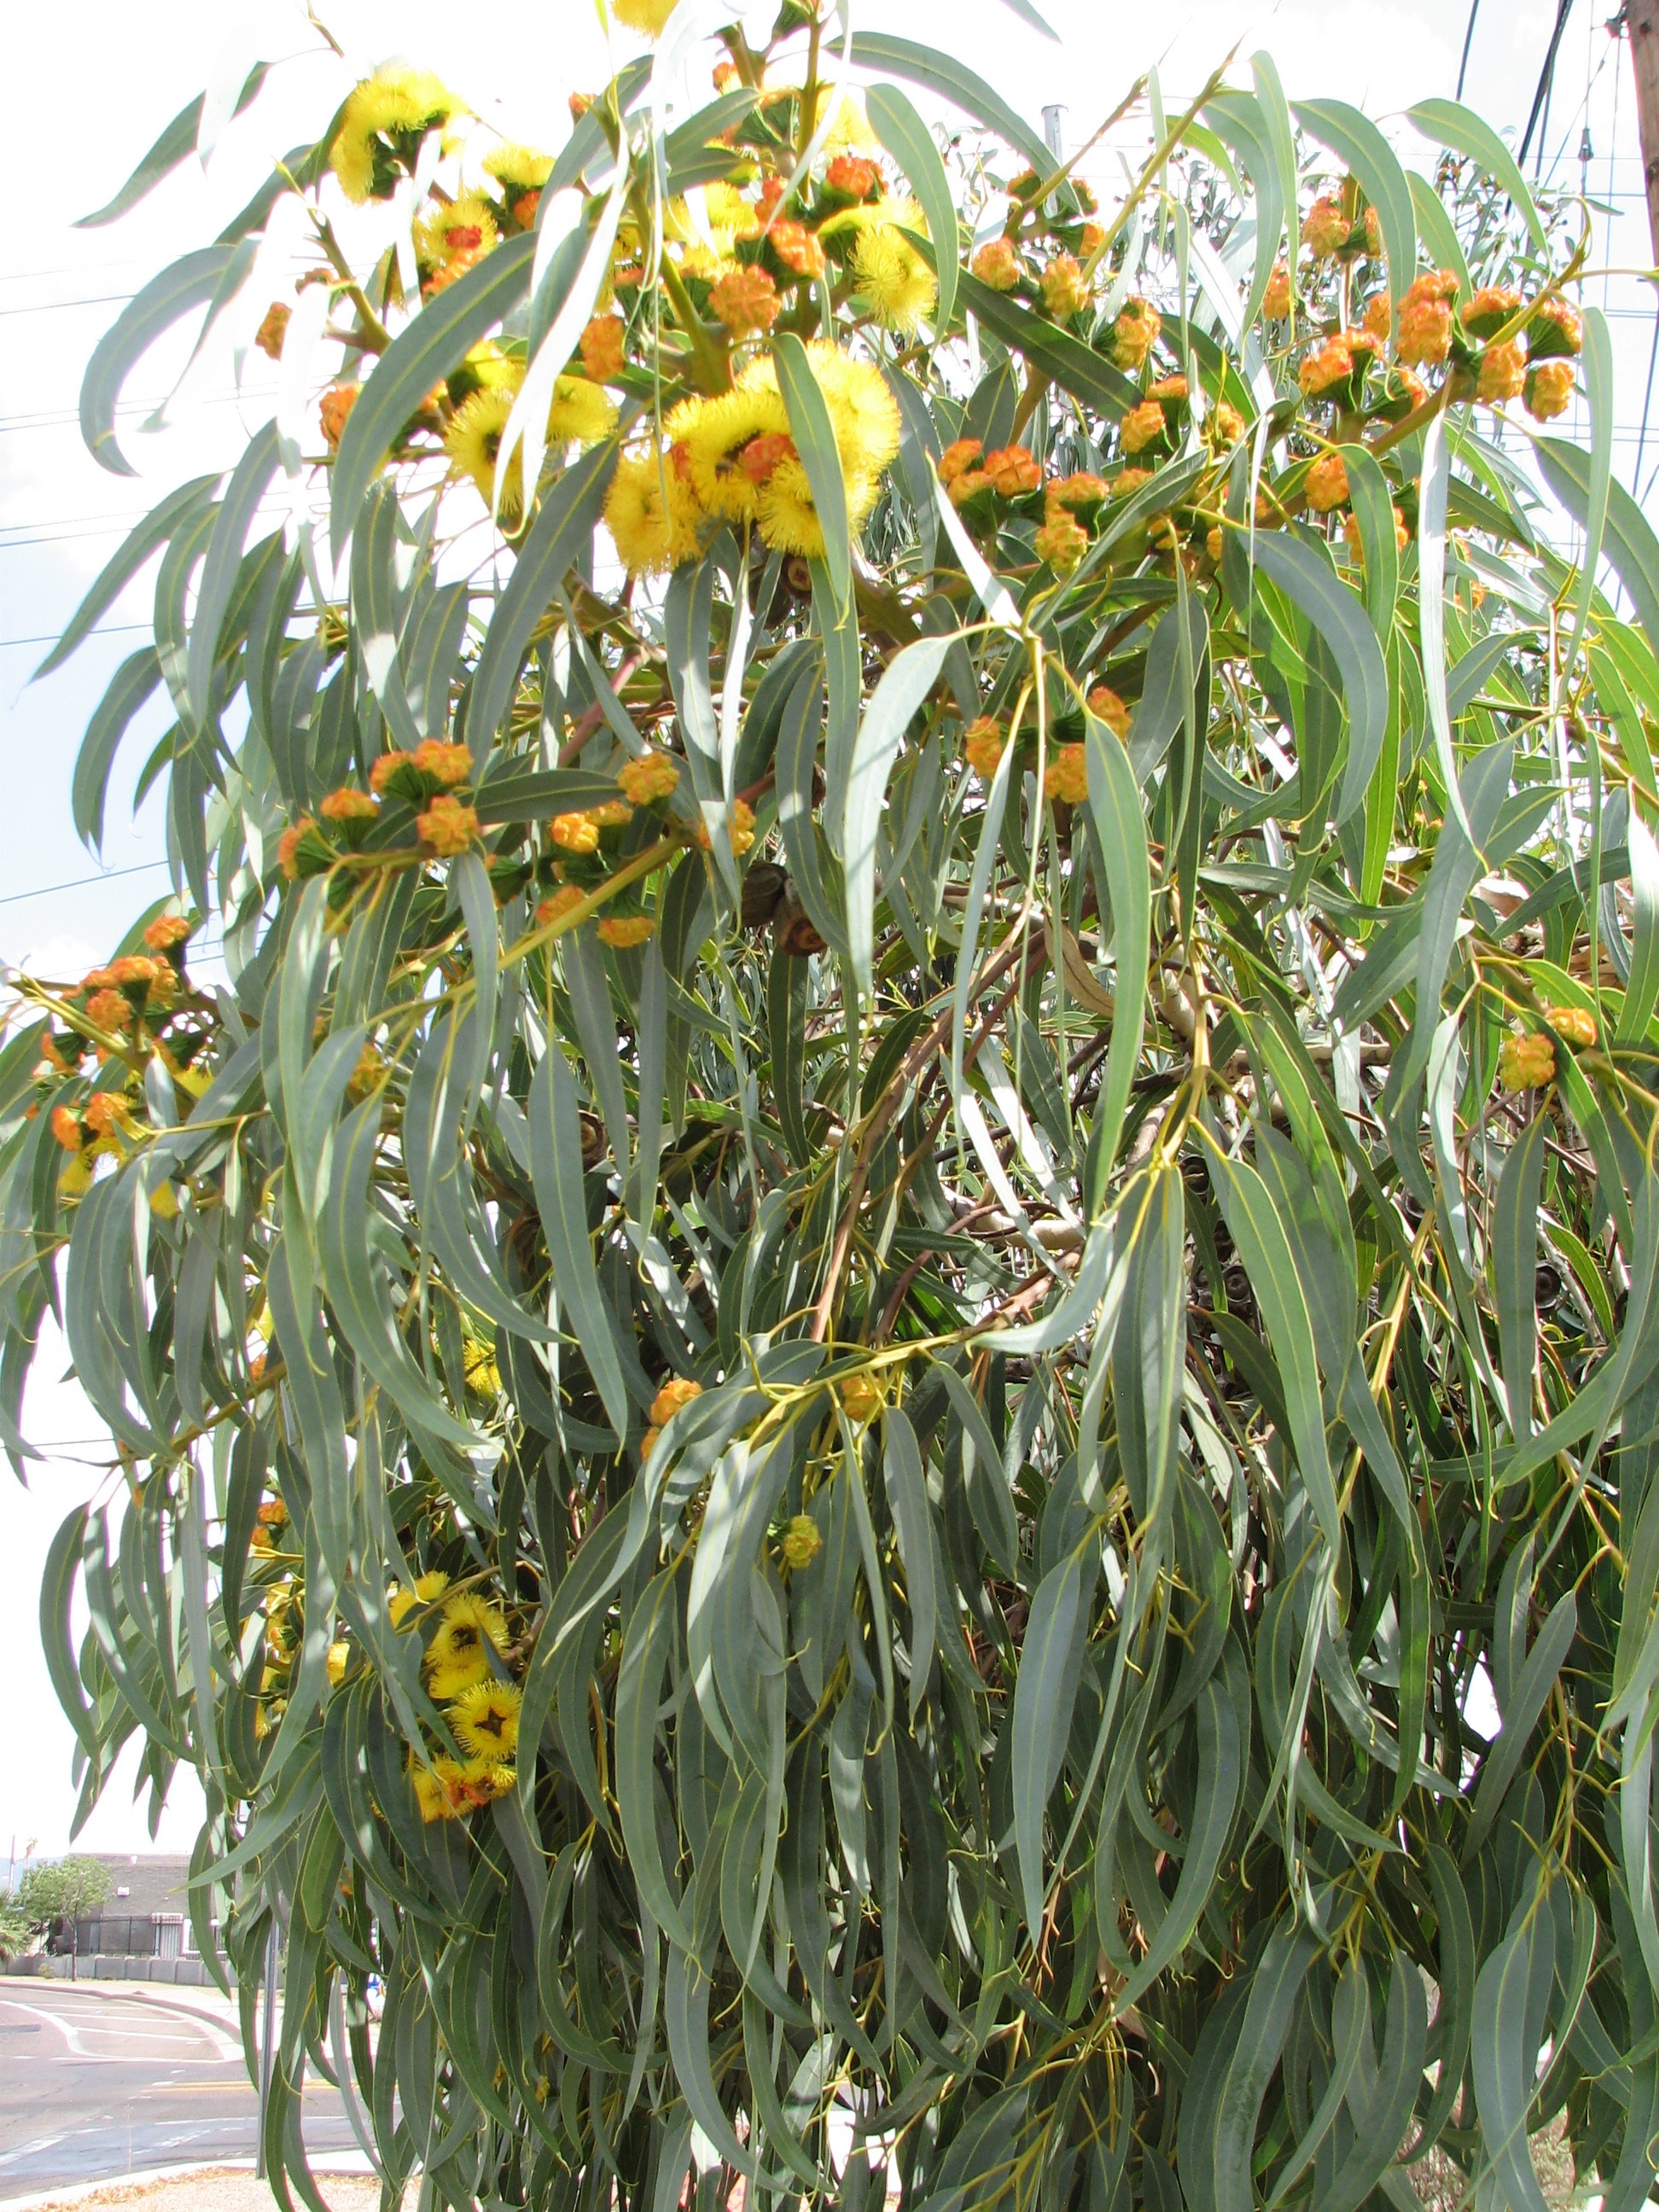 g E.erythrocorys red caps and yellow flowers appear simultan.jpg